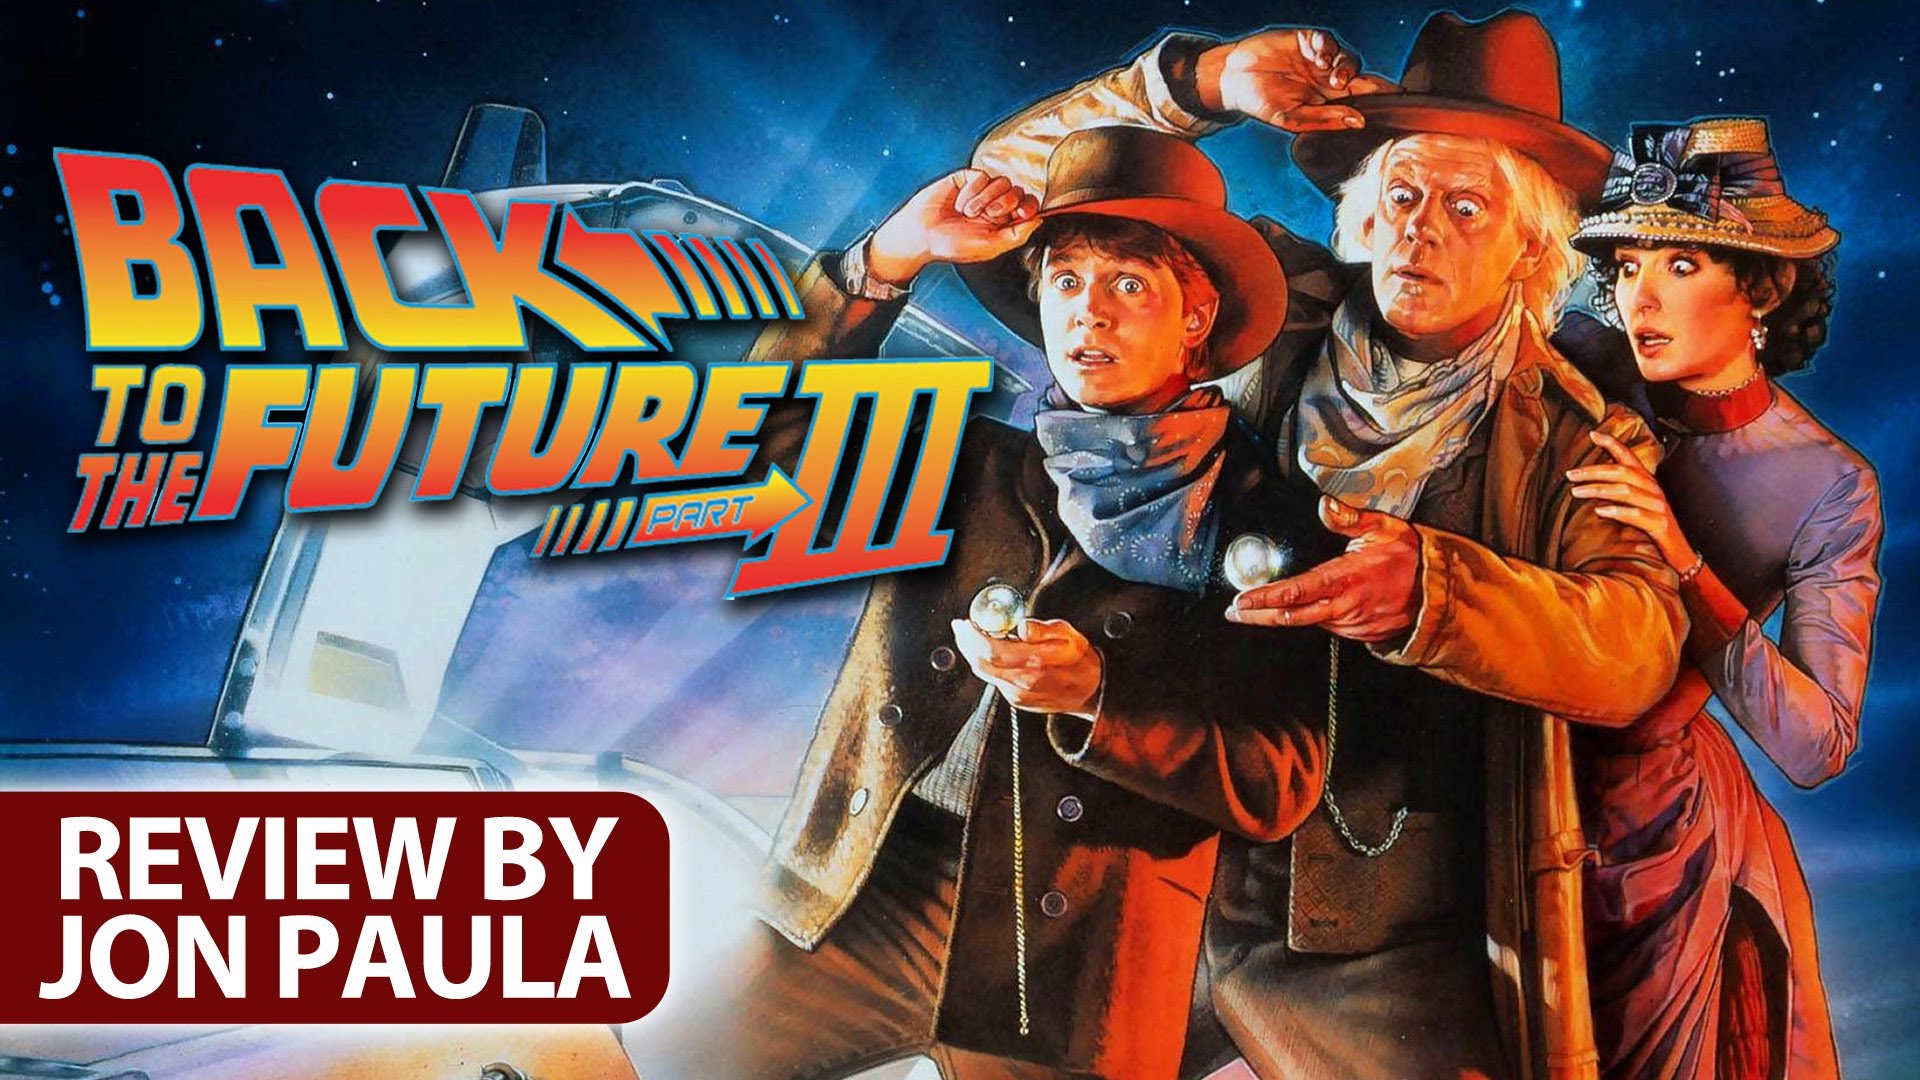 Back To The Future Part III #5